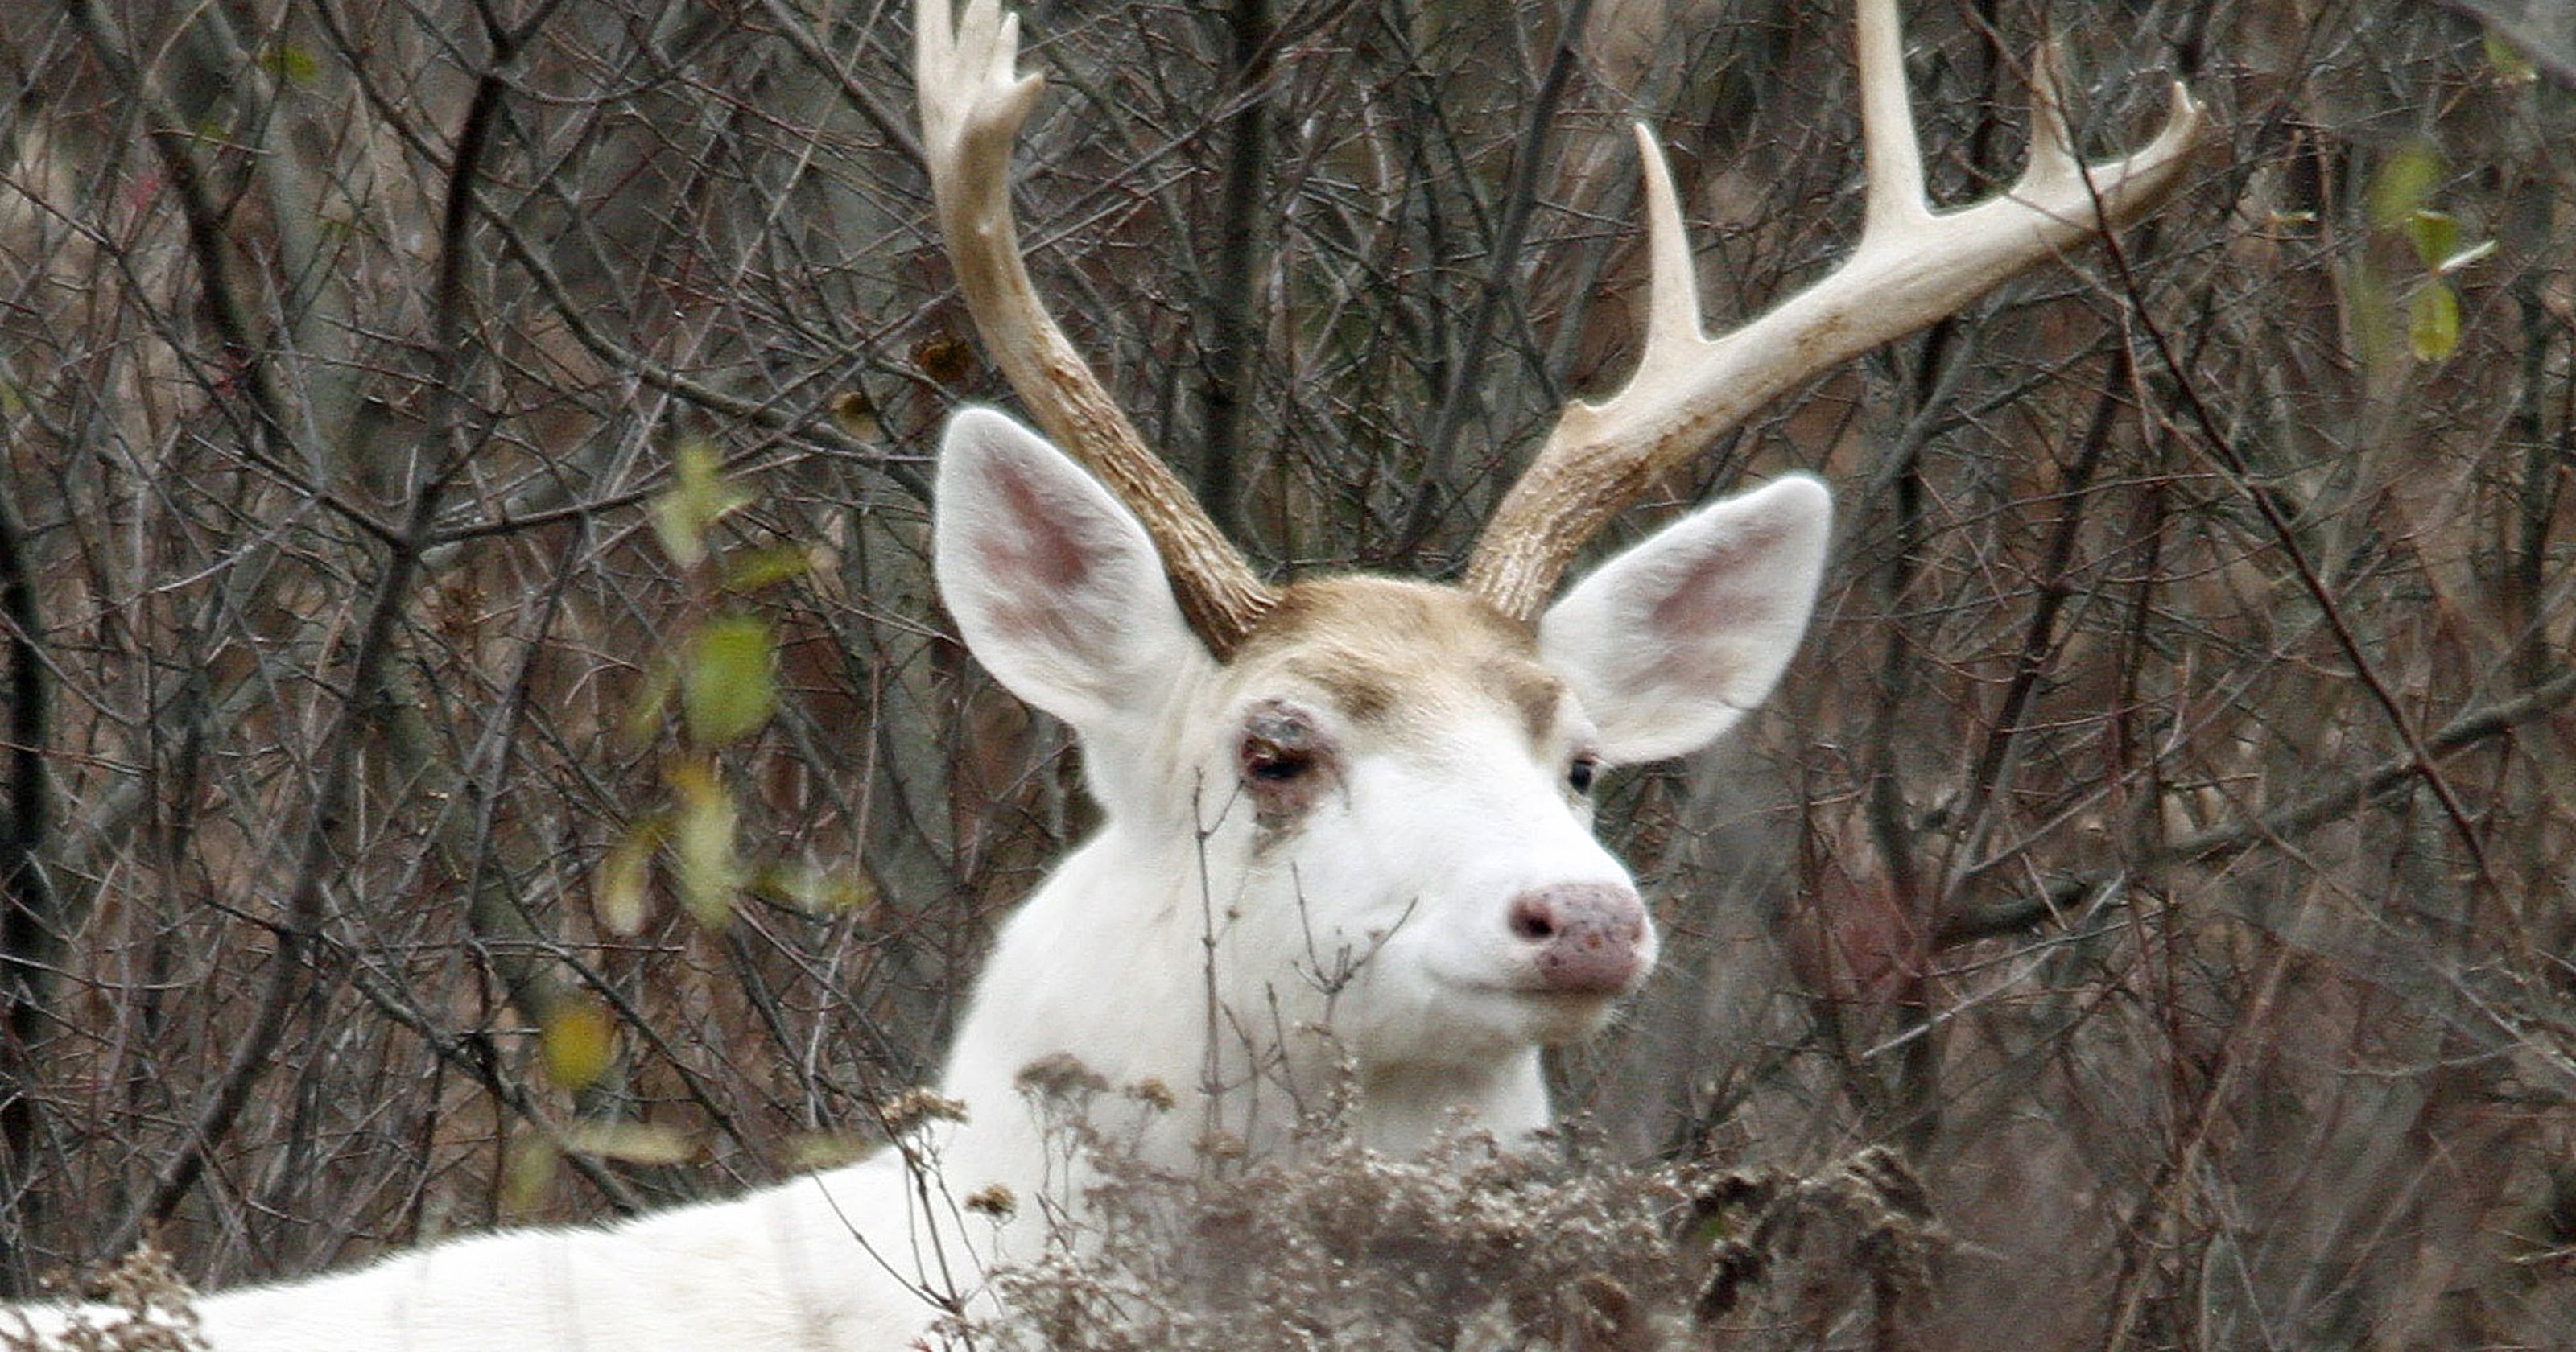 Fate of famous white deer in question after base closure